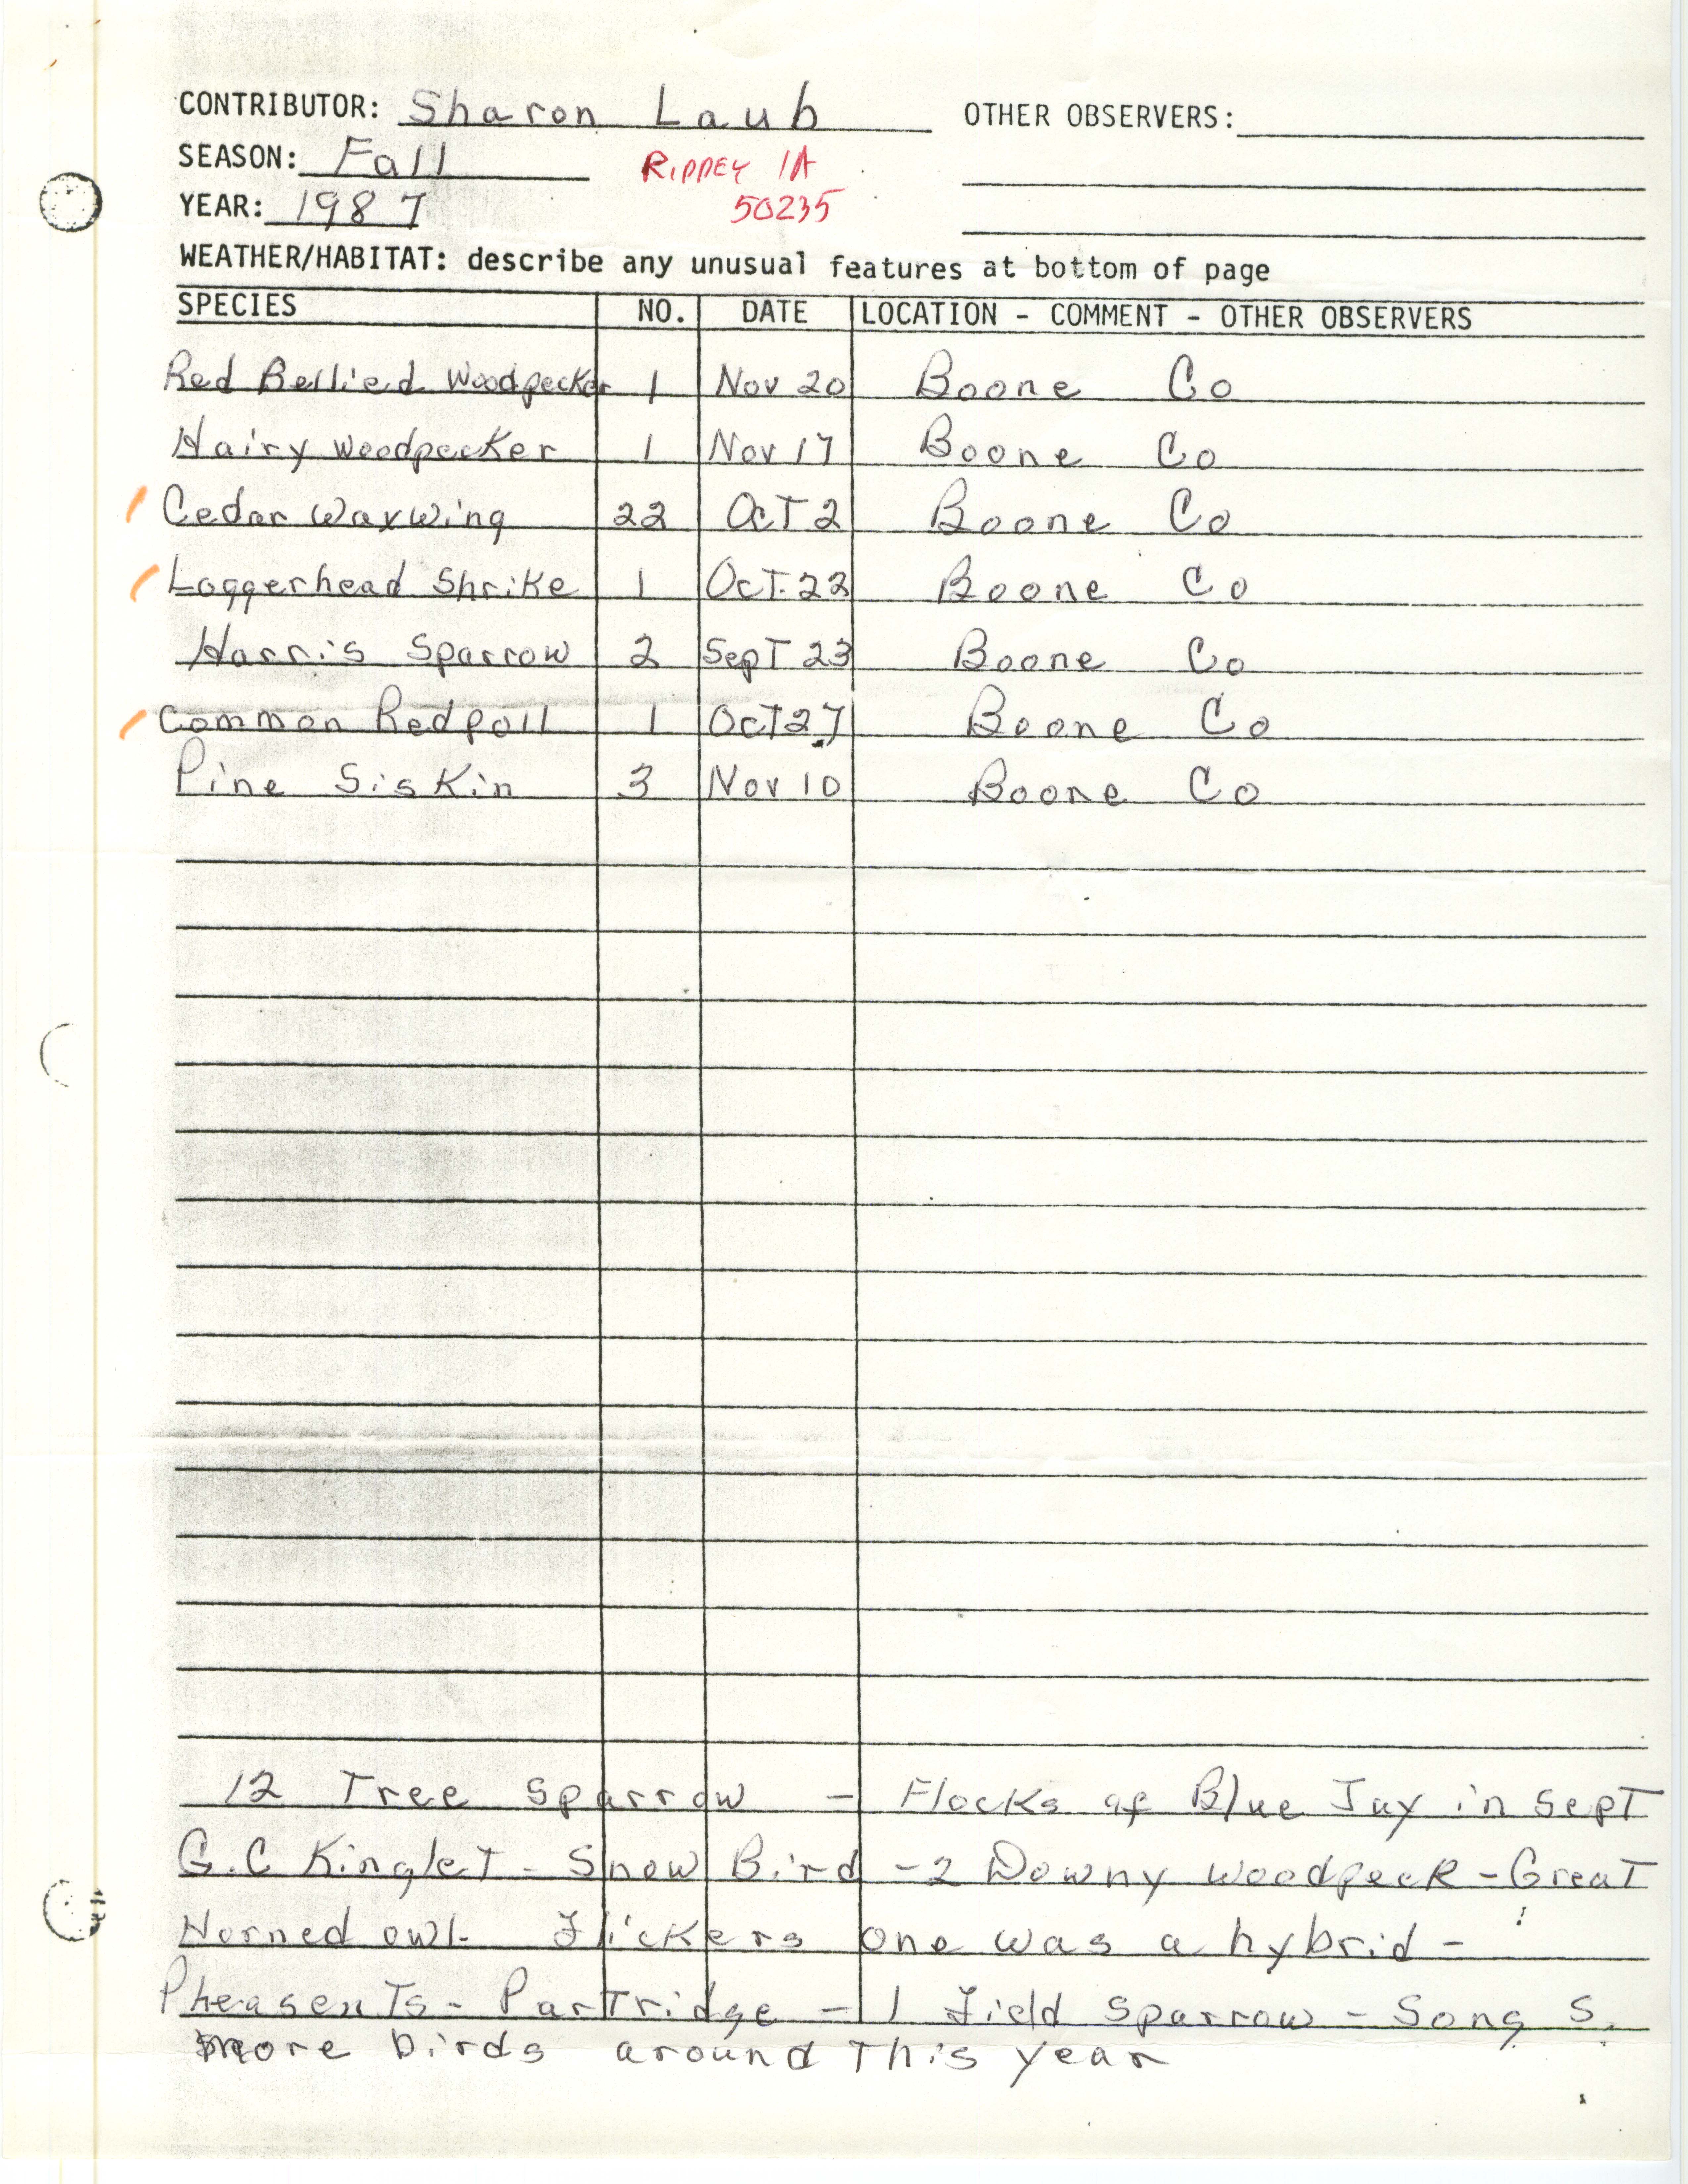 Field notes contributed by Sharon Laub, fall 1987